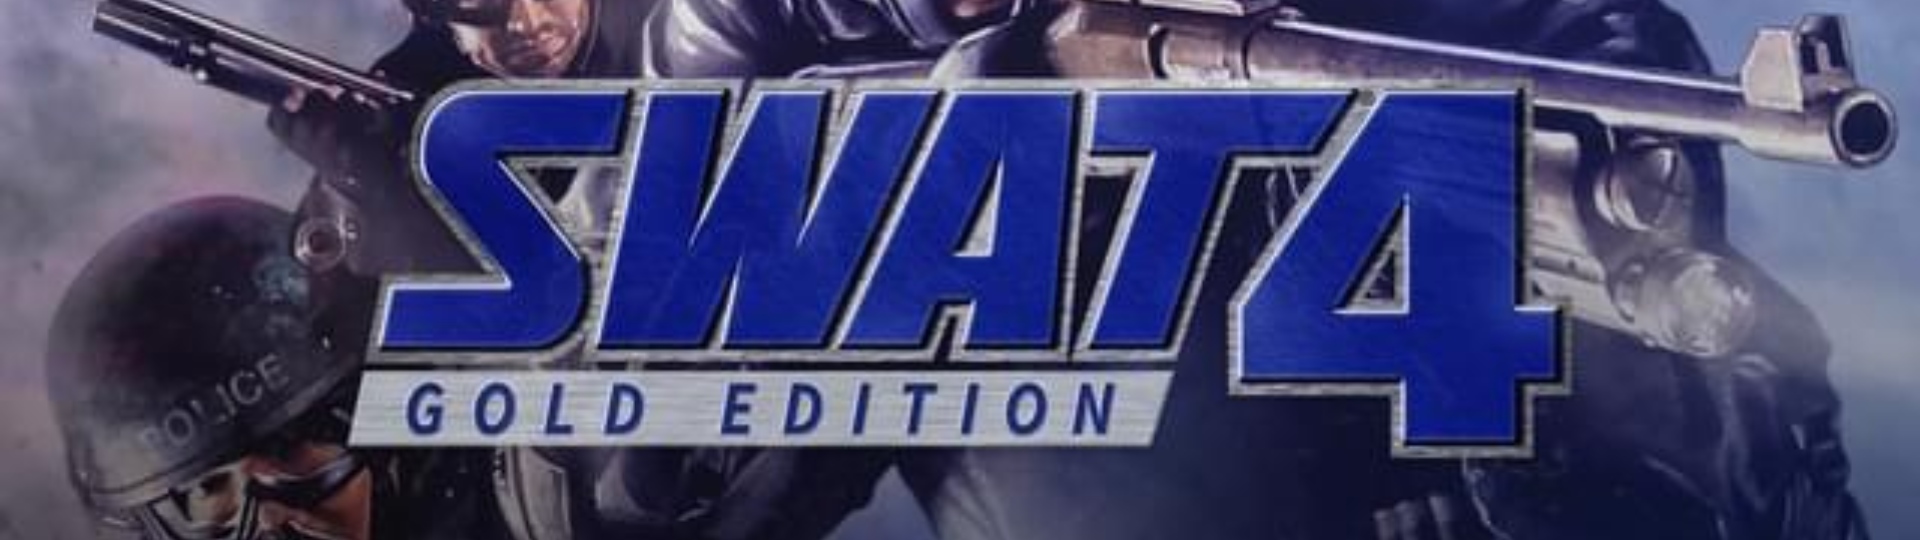 banner image with several police officers in tactical gear behind a title reading SWAT 4 GOLD EDITION